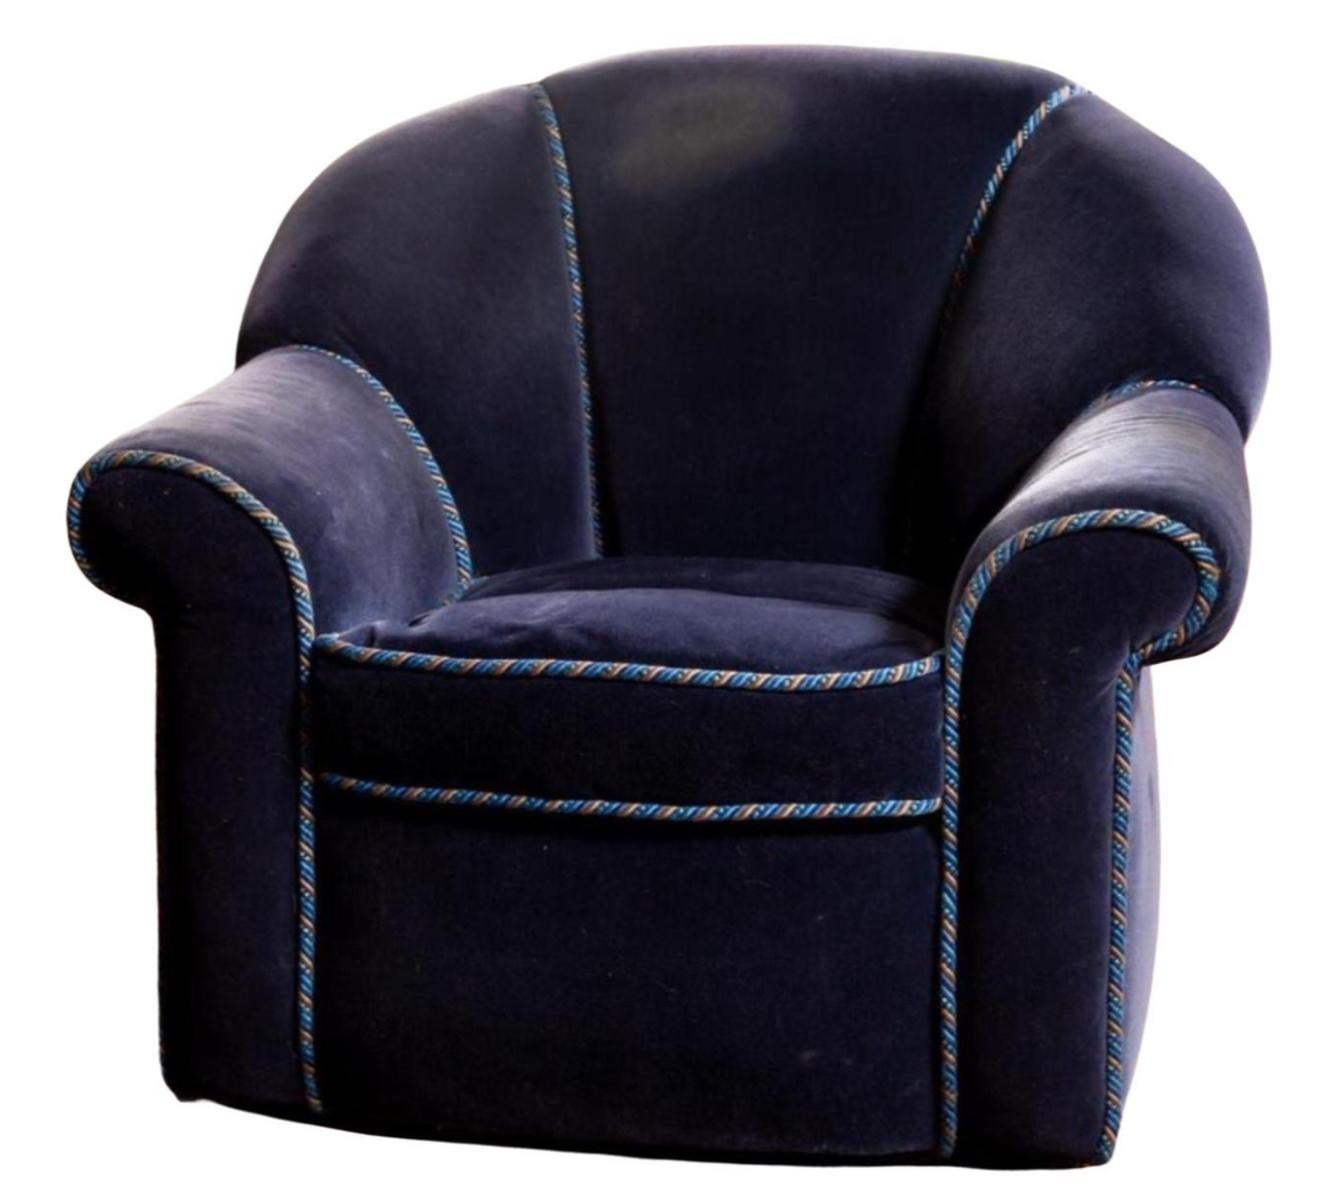 20th Century Pair of Art Deco Style Fully Upholstered Sapphire Blue Velvet Club Chairs For Sale